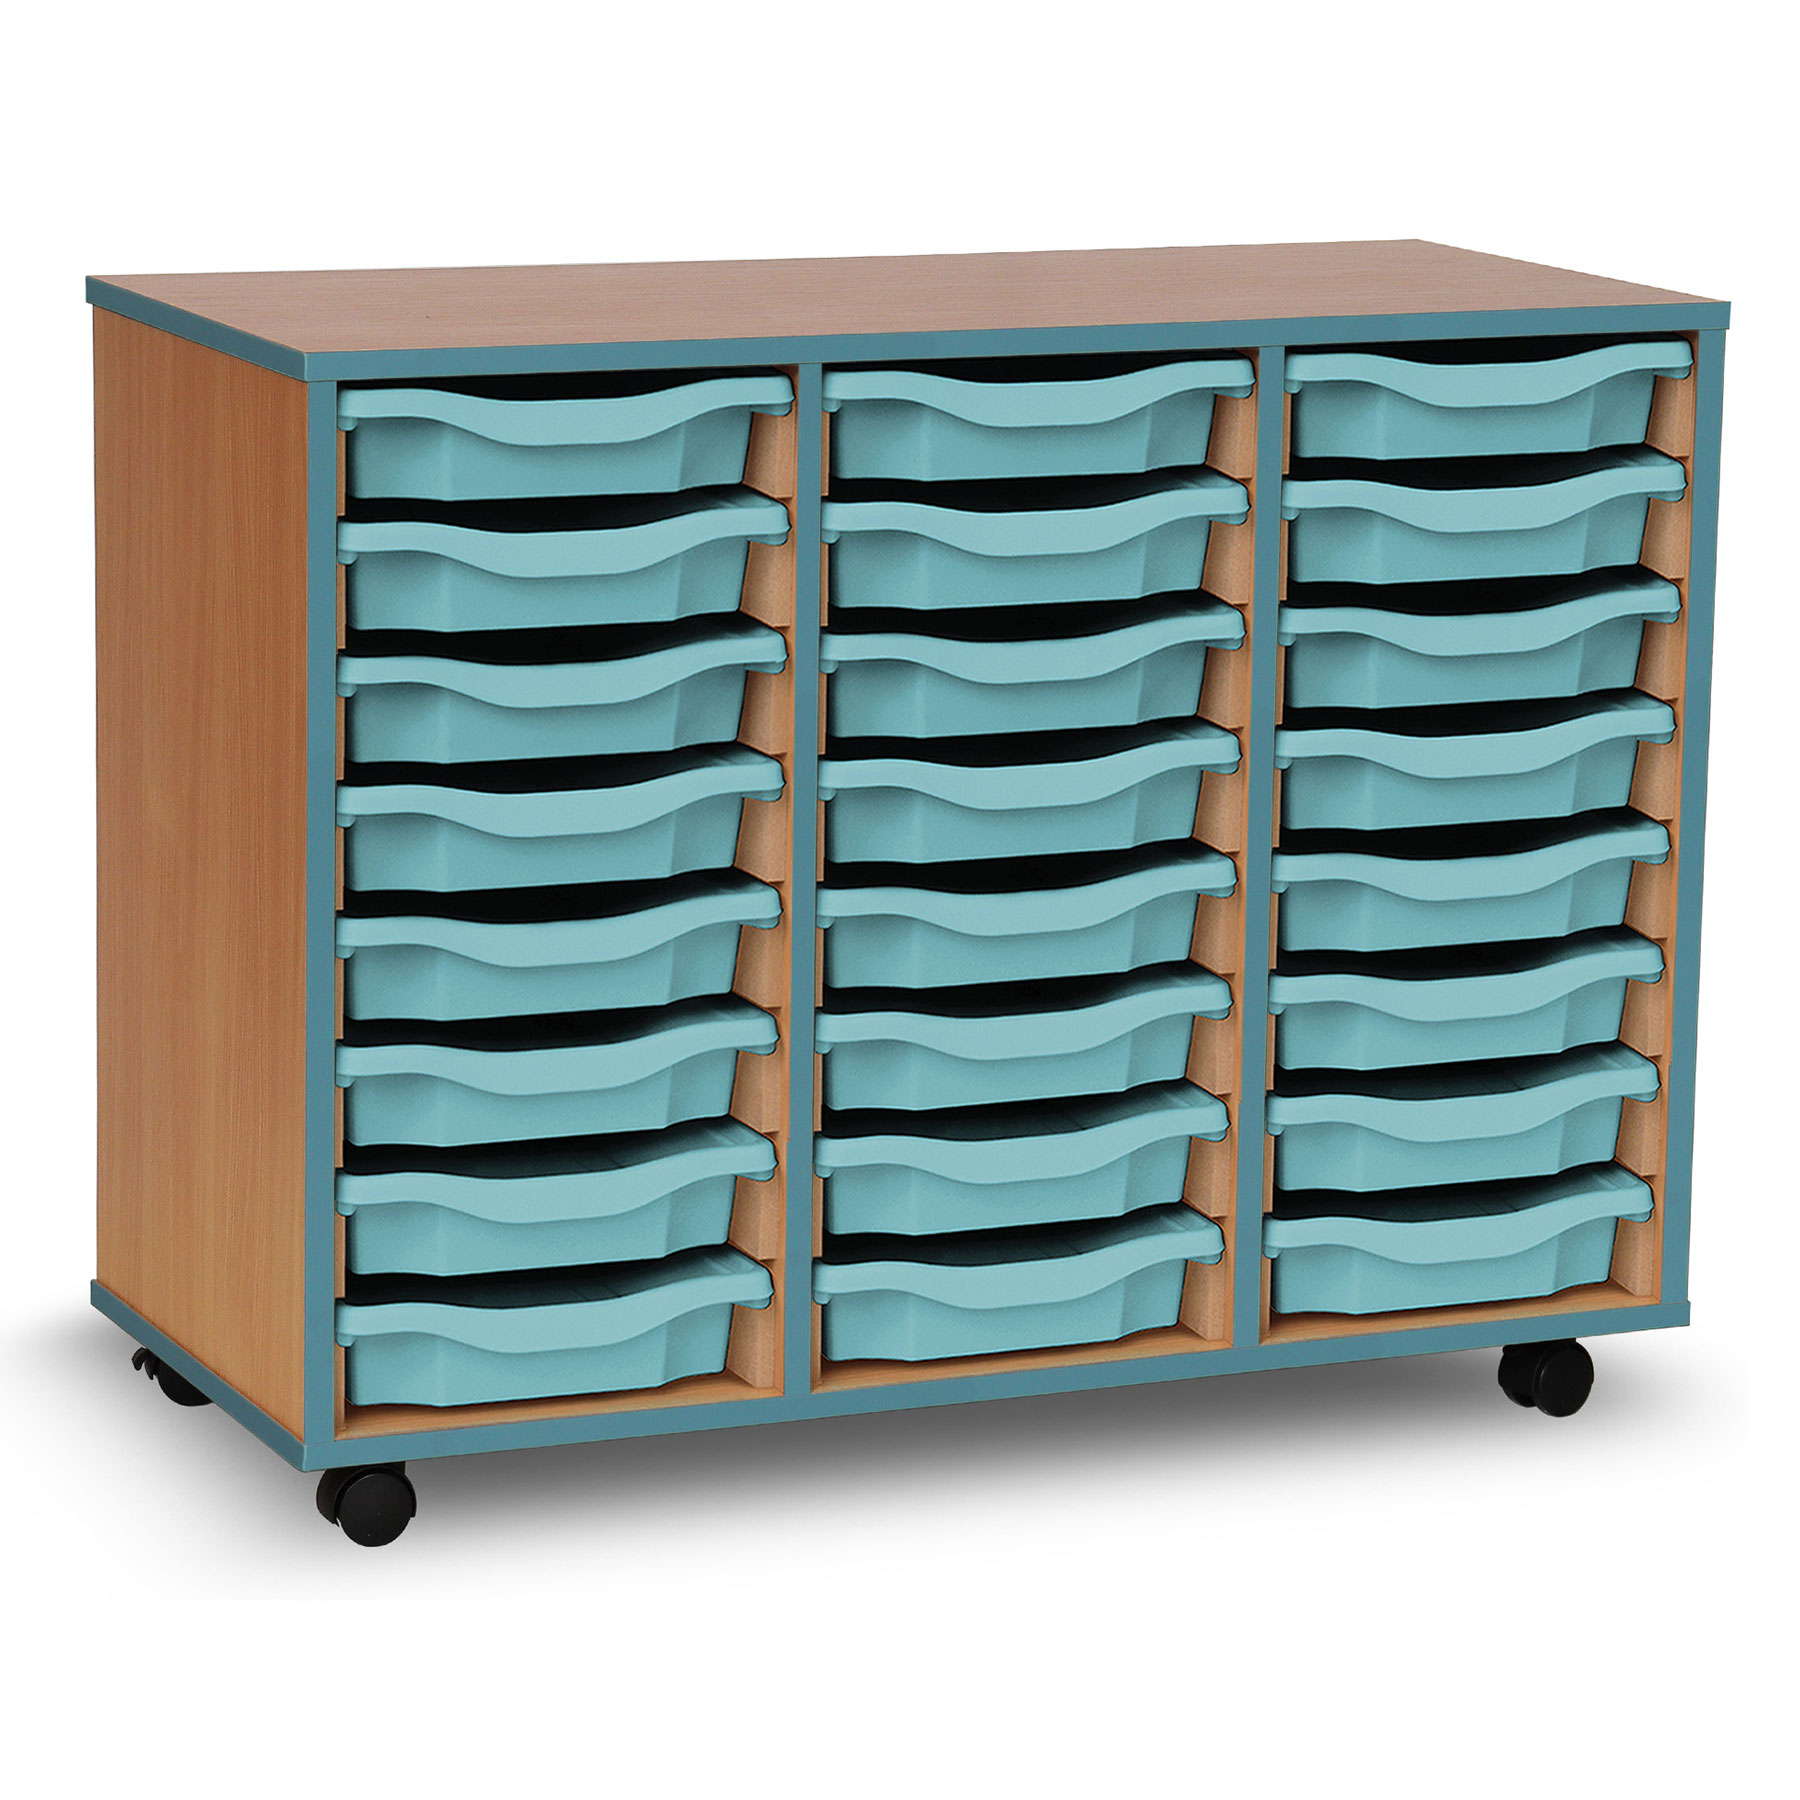 24 Single Tray Unit with Metal Blue Edging, Castors & Metal Blue Trays